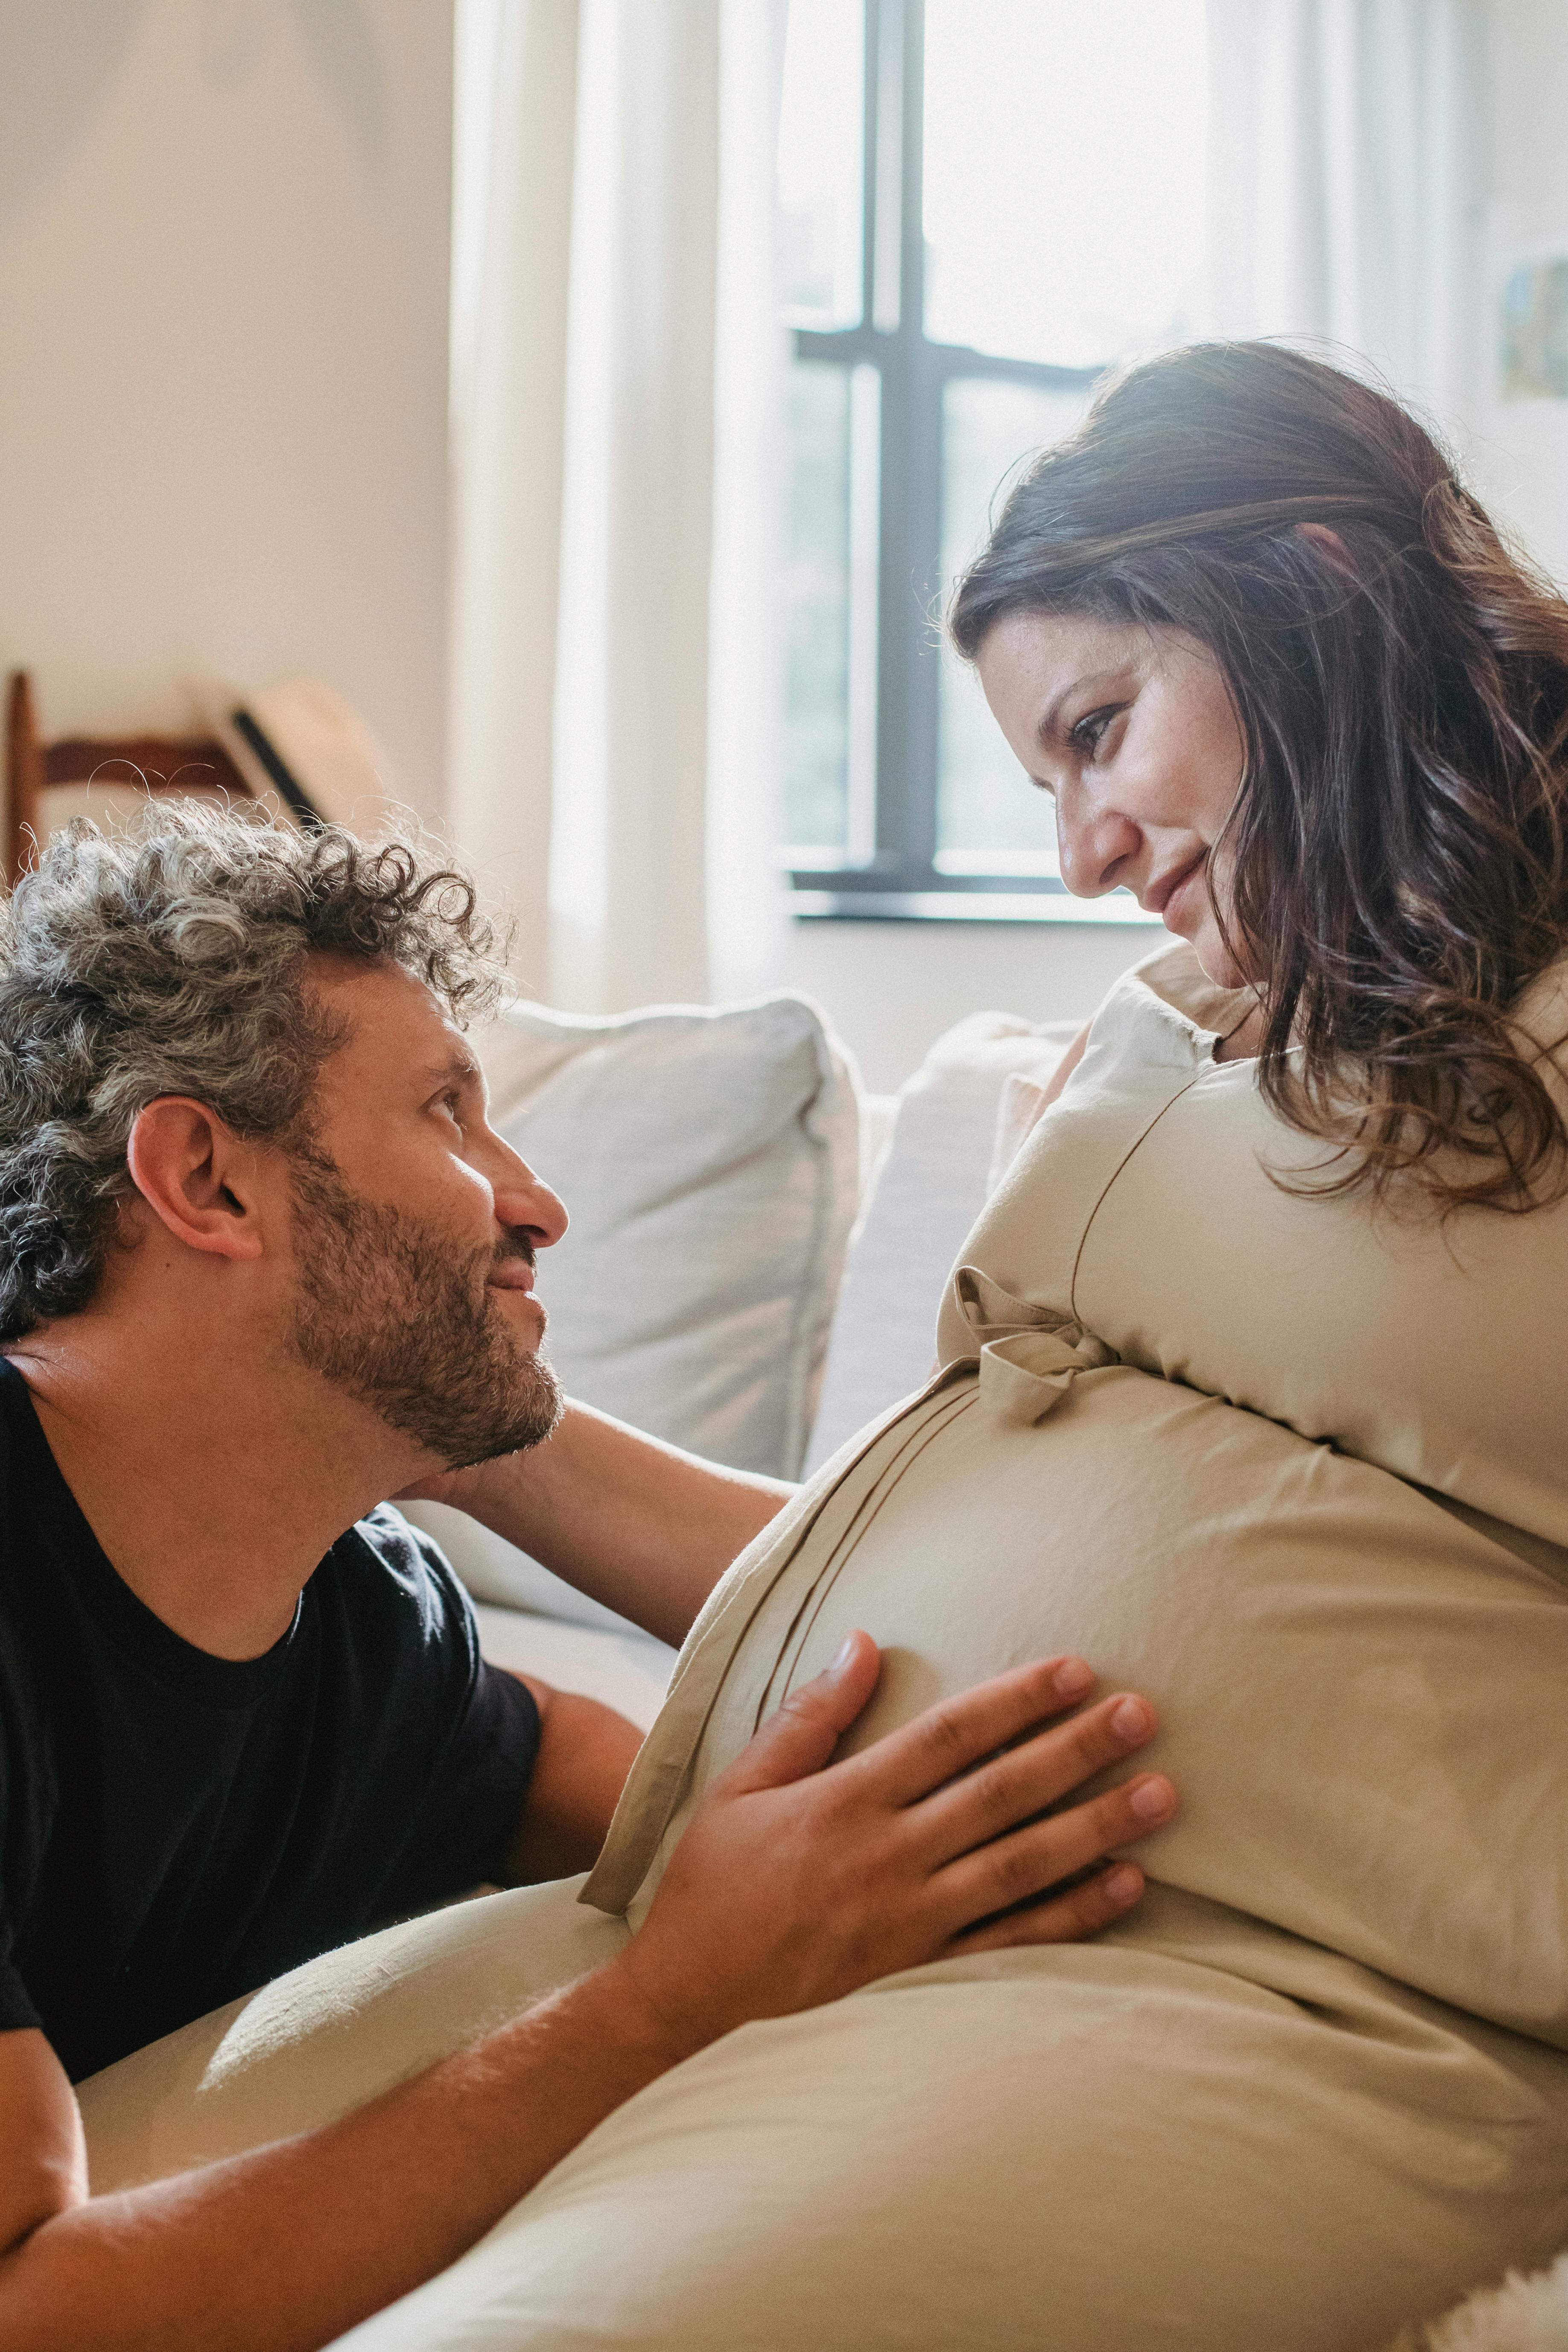 Man touching his pregnant wife's belly as they stare at each other | Source: Pexels